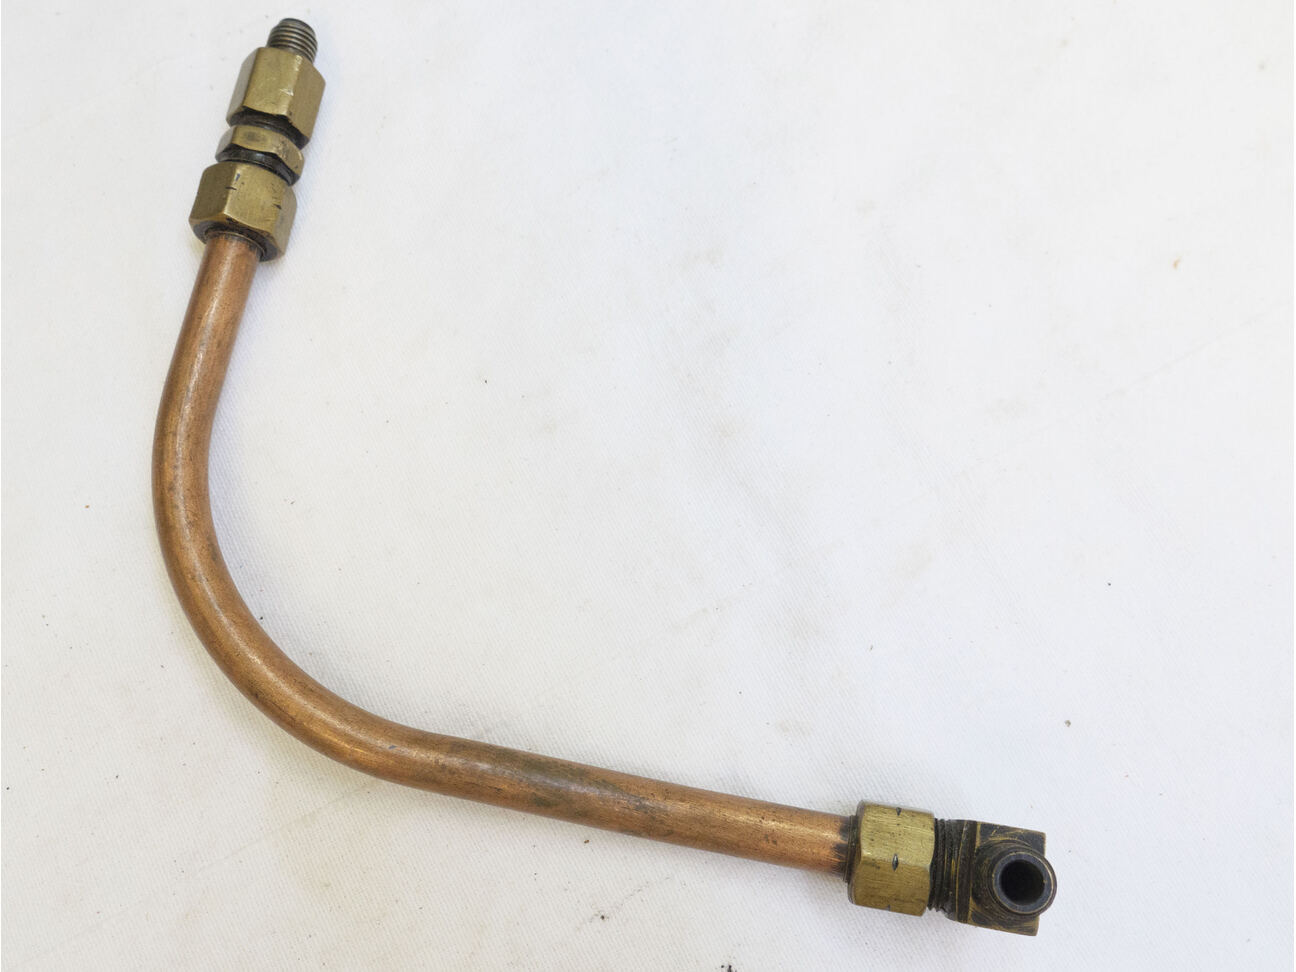 68 Carbine brass / copper air line with fittings, used